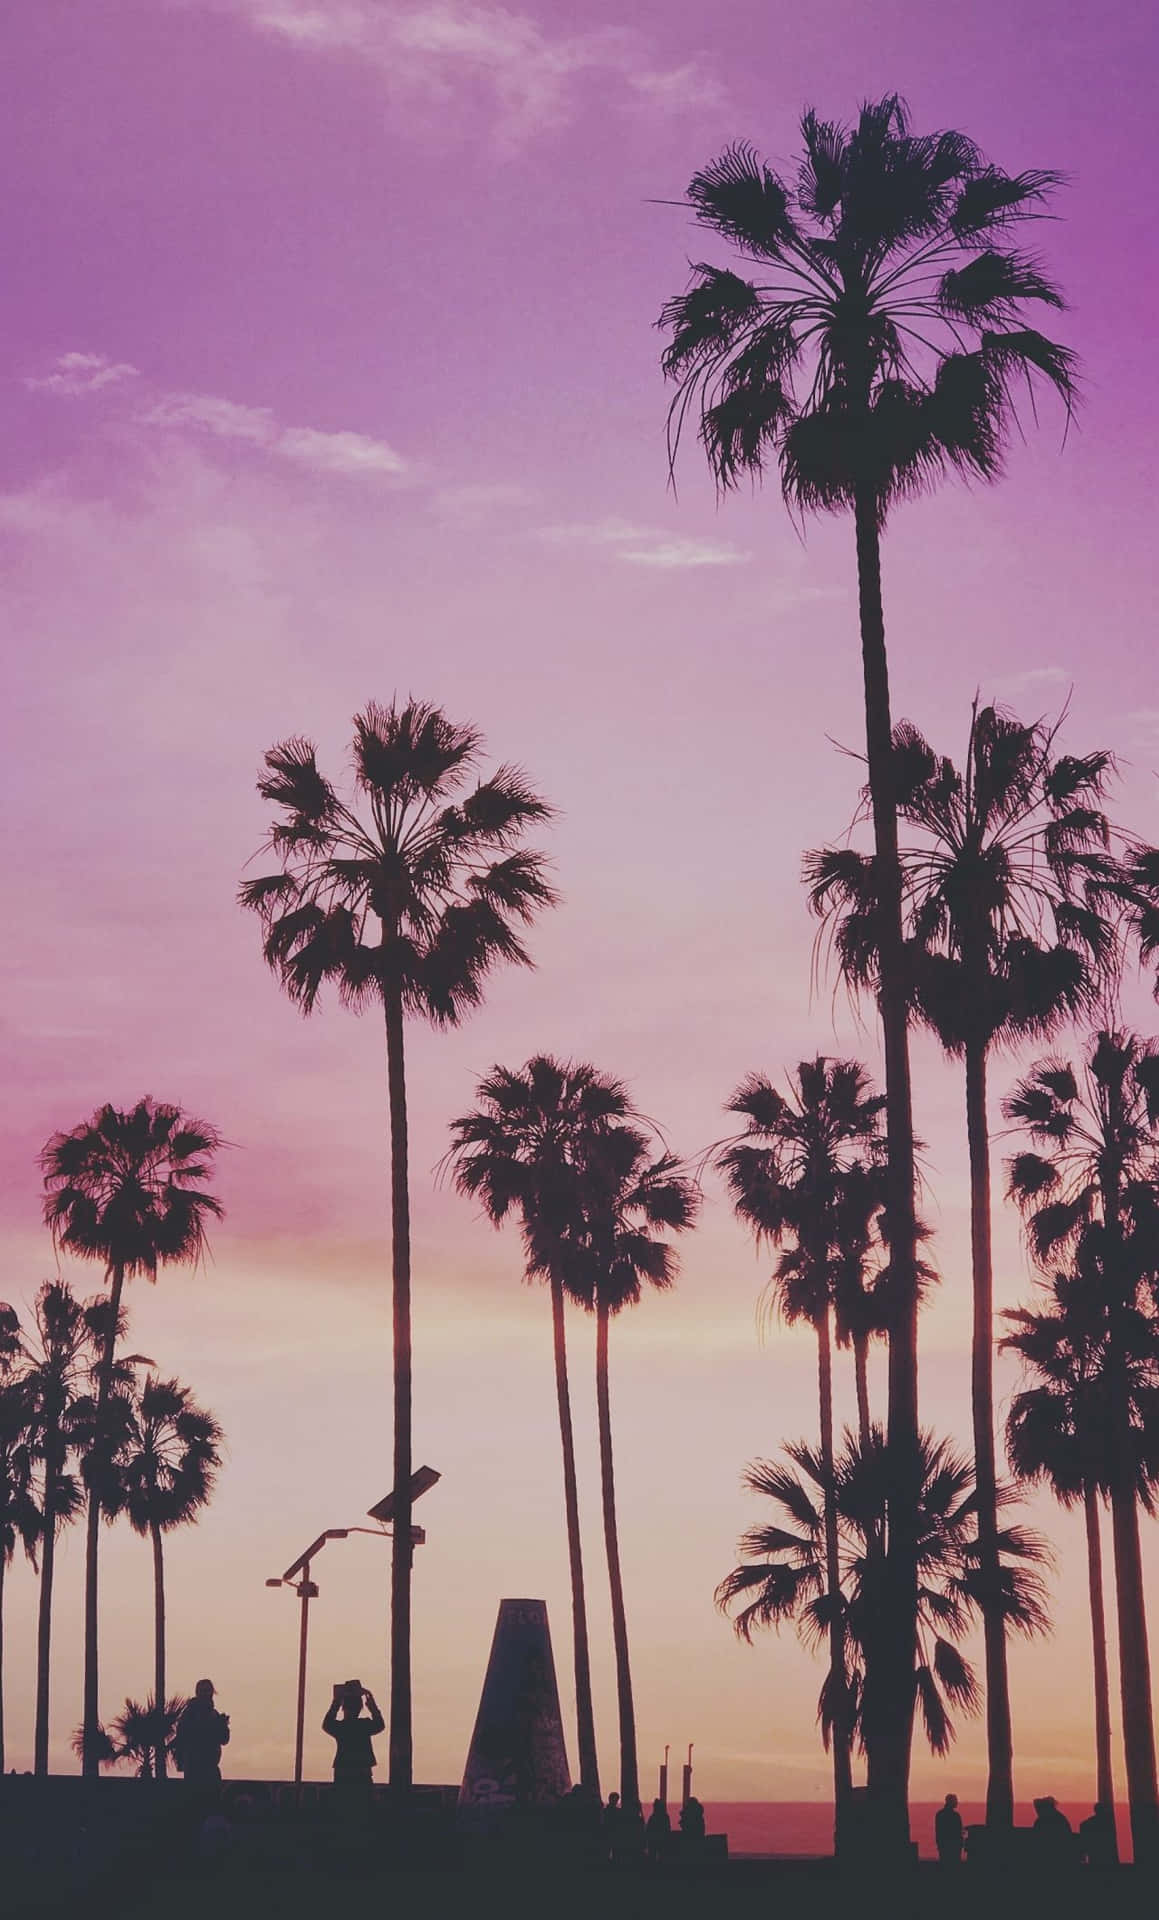 A purple and pink sunset with palm trees in the foreground. - Miami